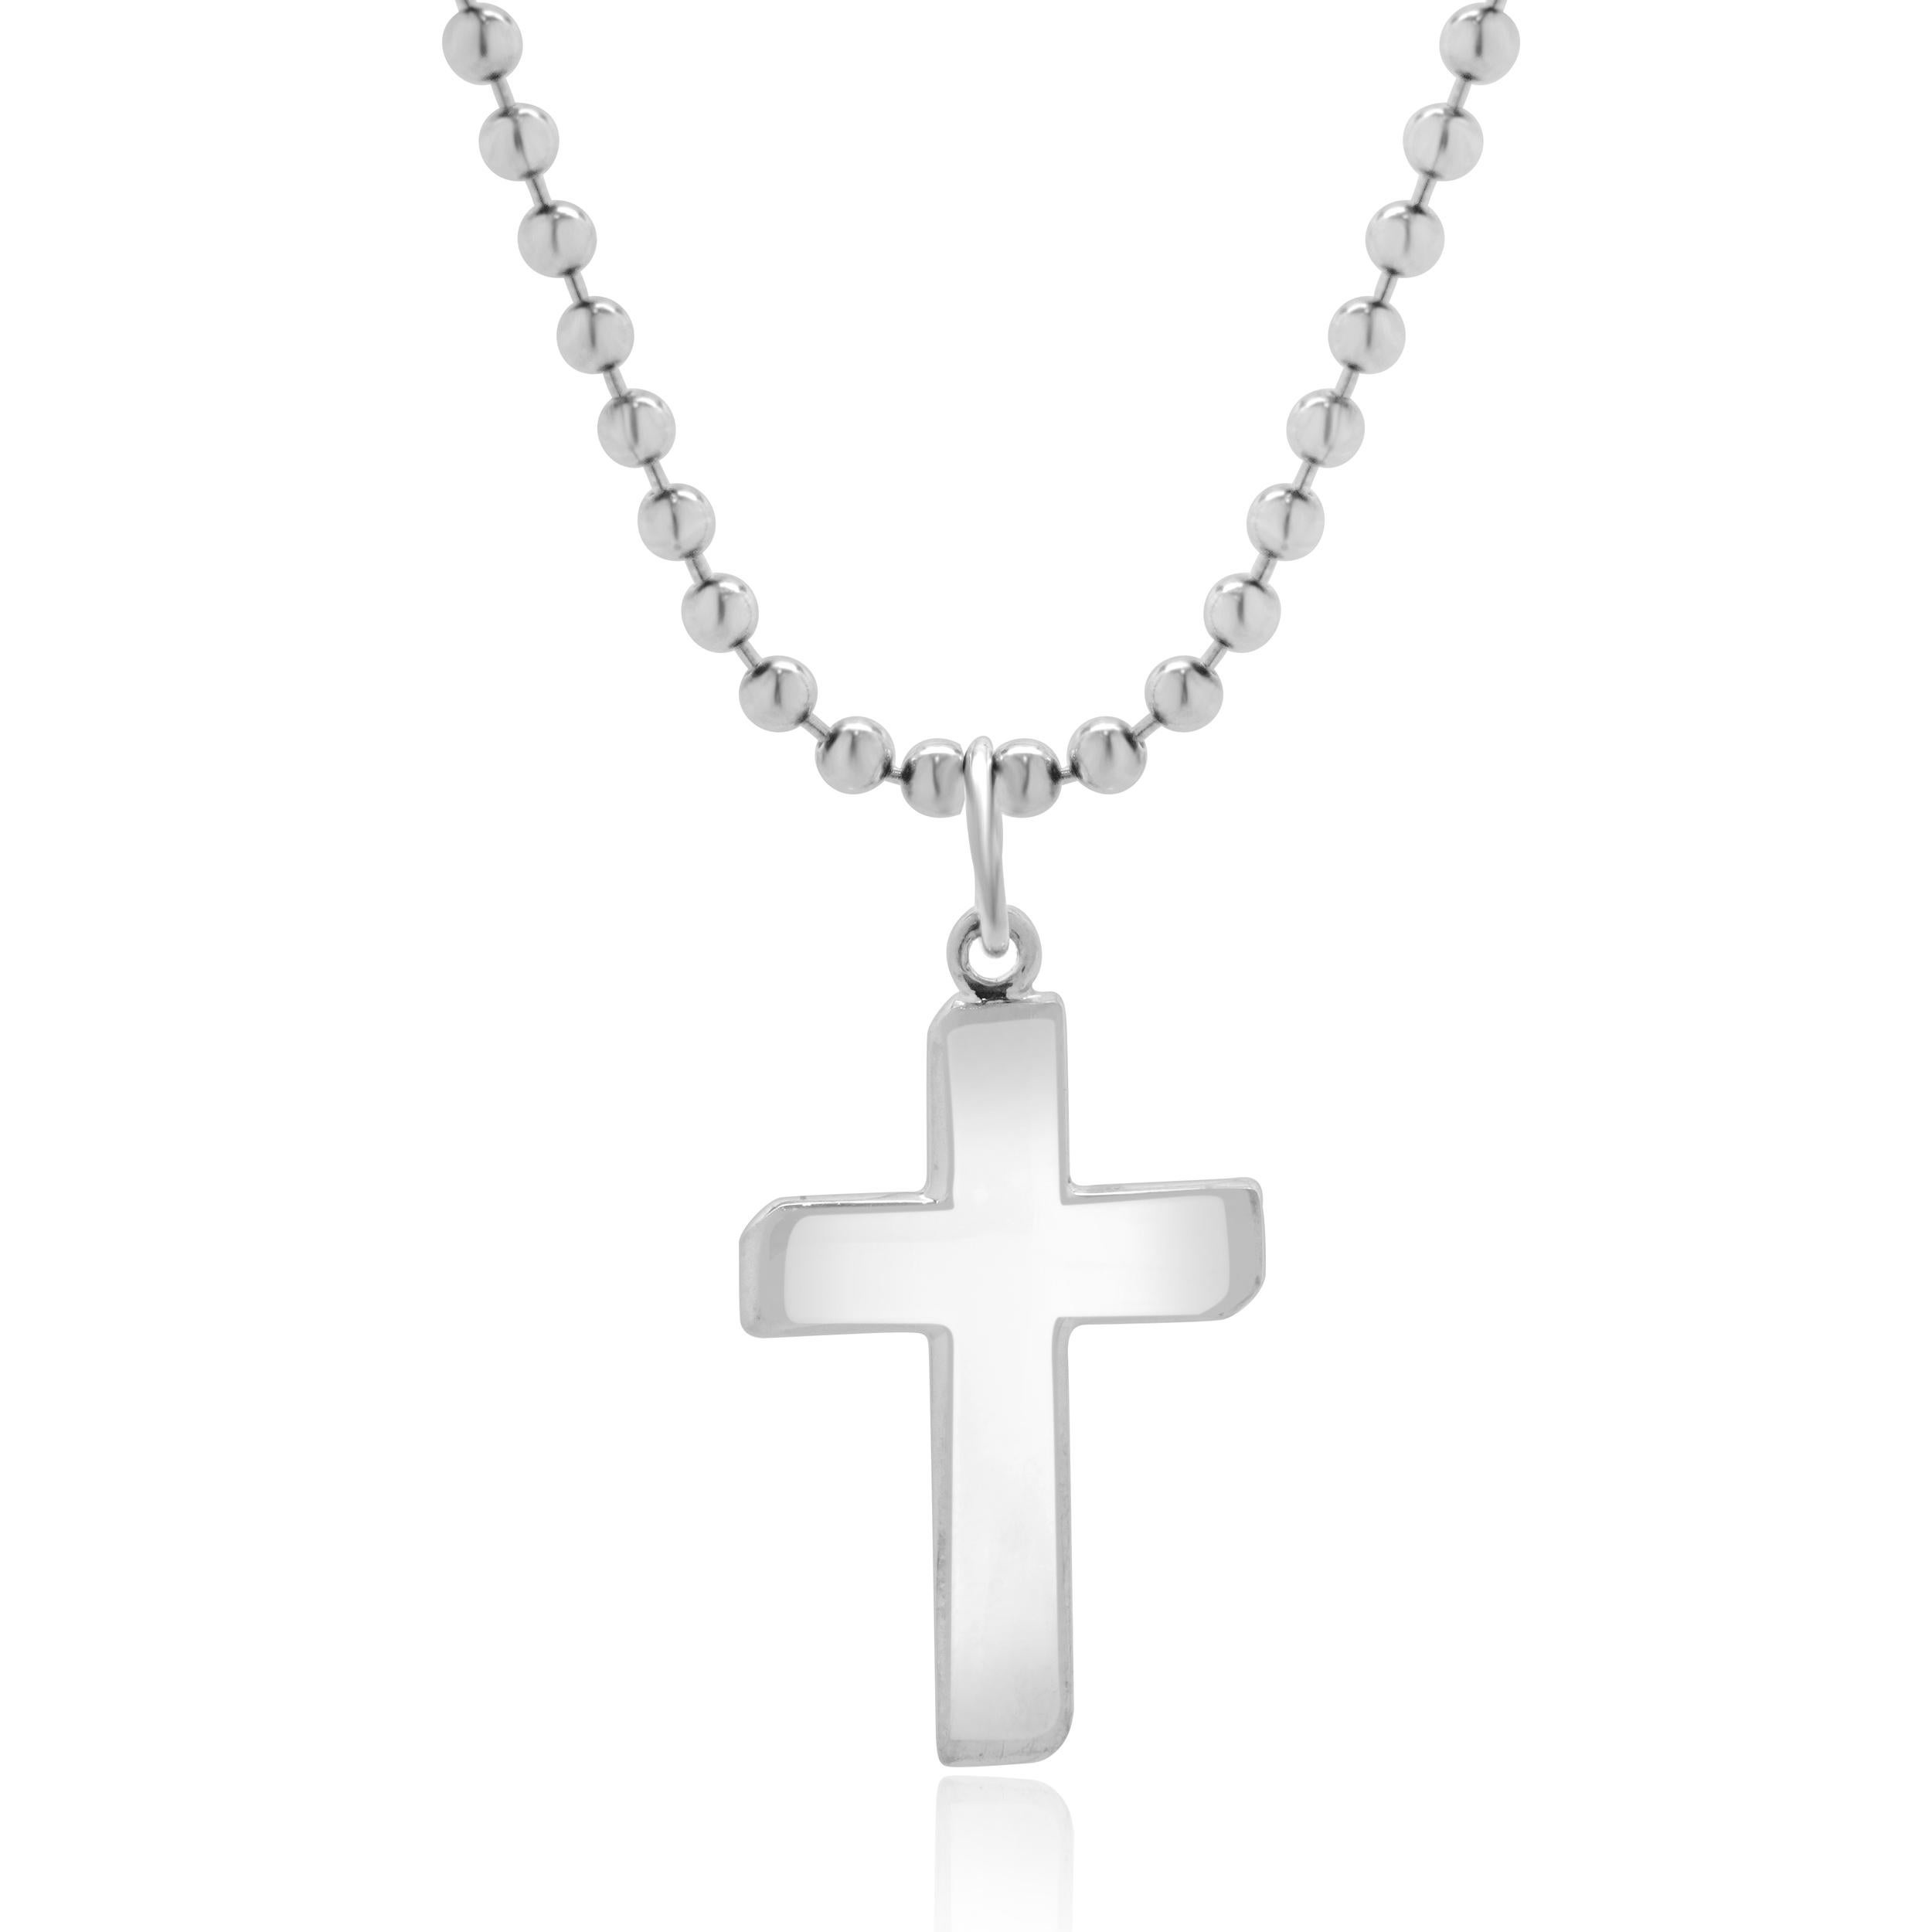 Designer: custom 
Material: sterling silver 
Dimensions: necklace measures 22-inches in length
Weight: 12.90 grams
